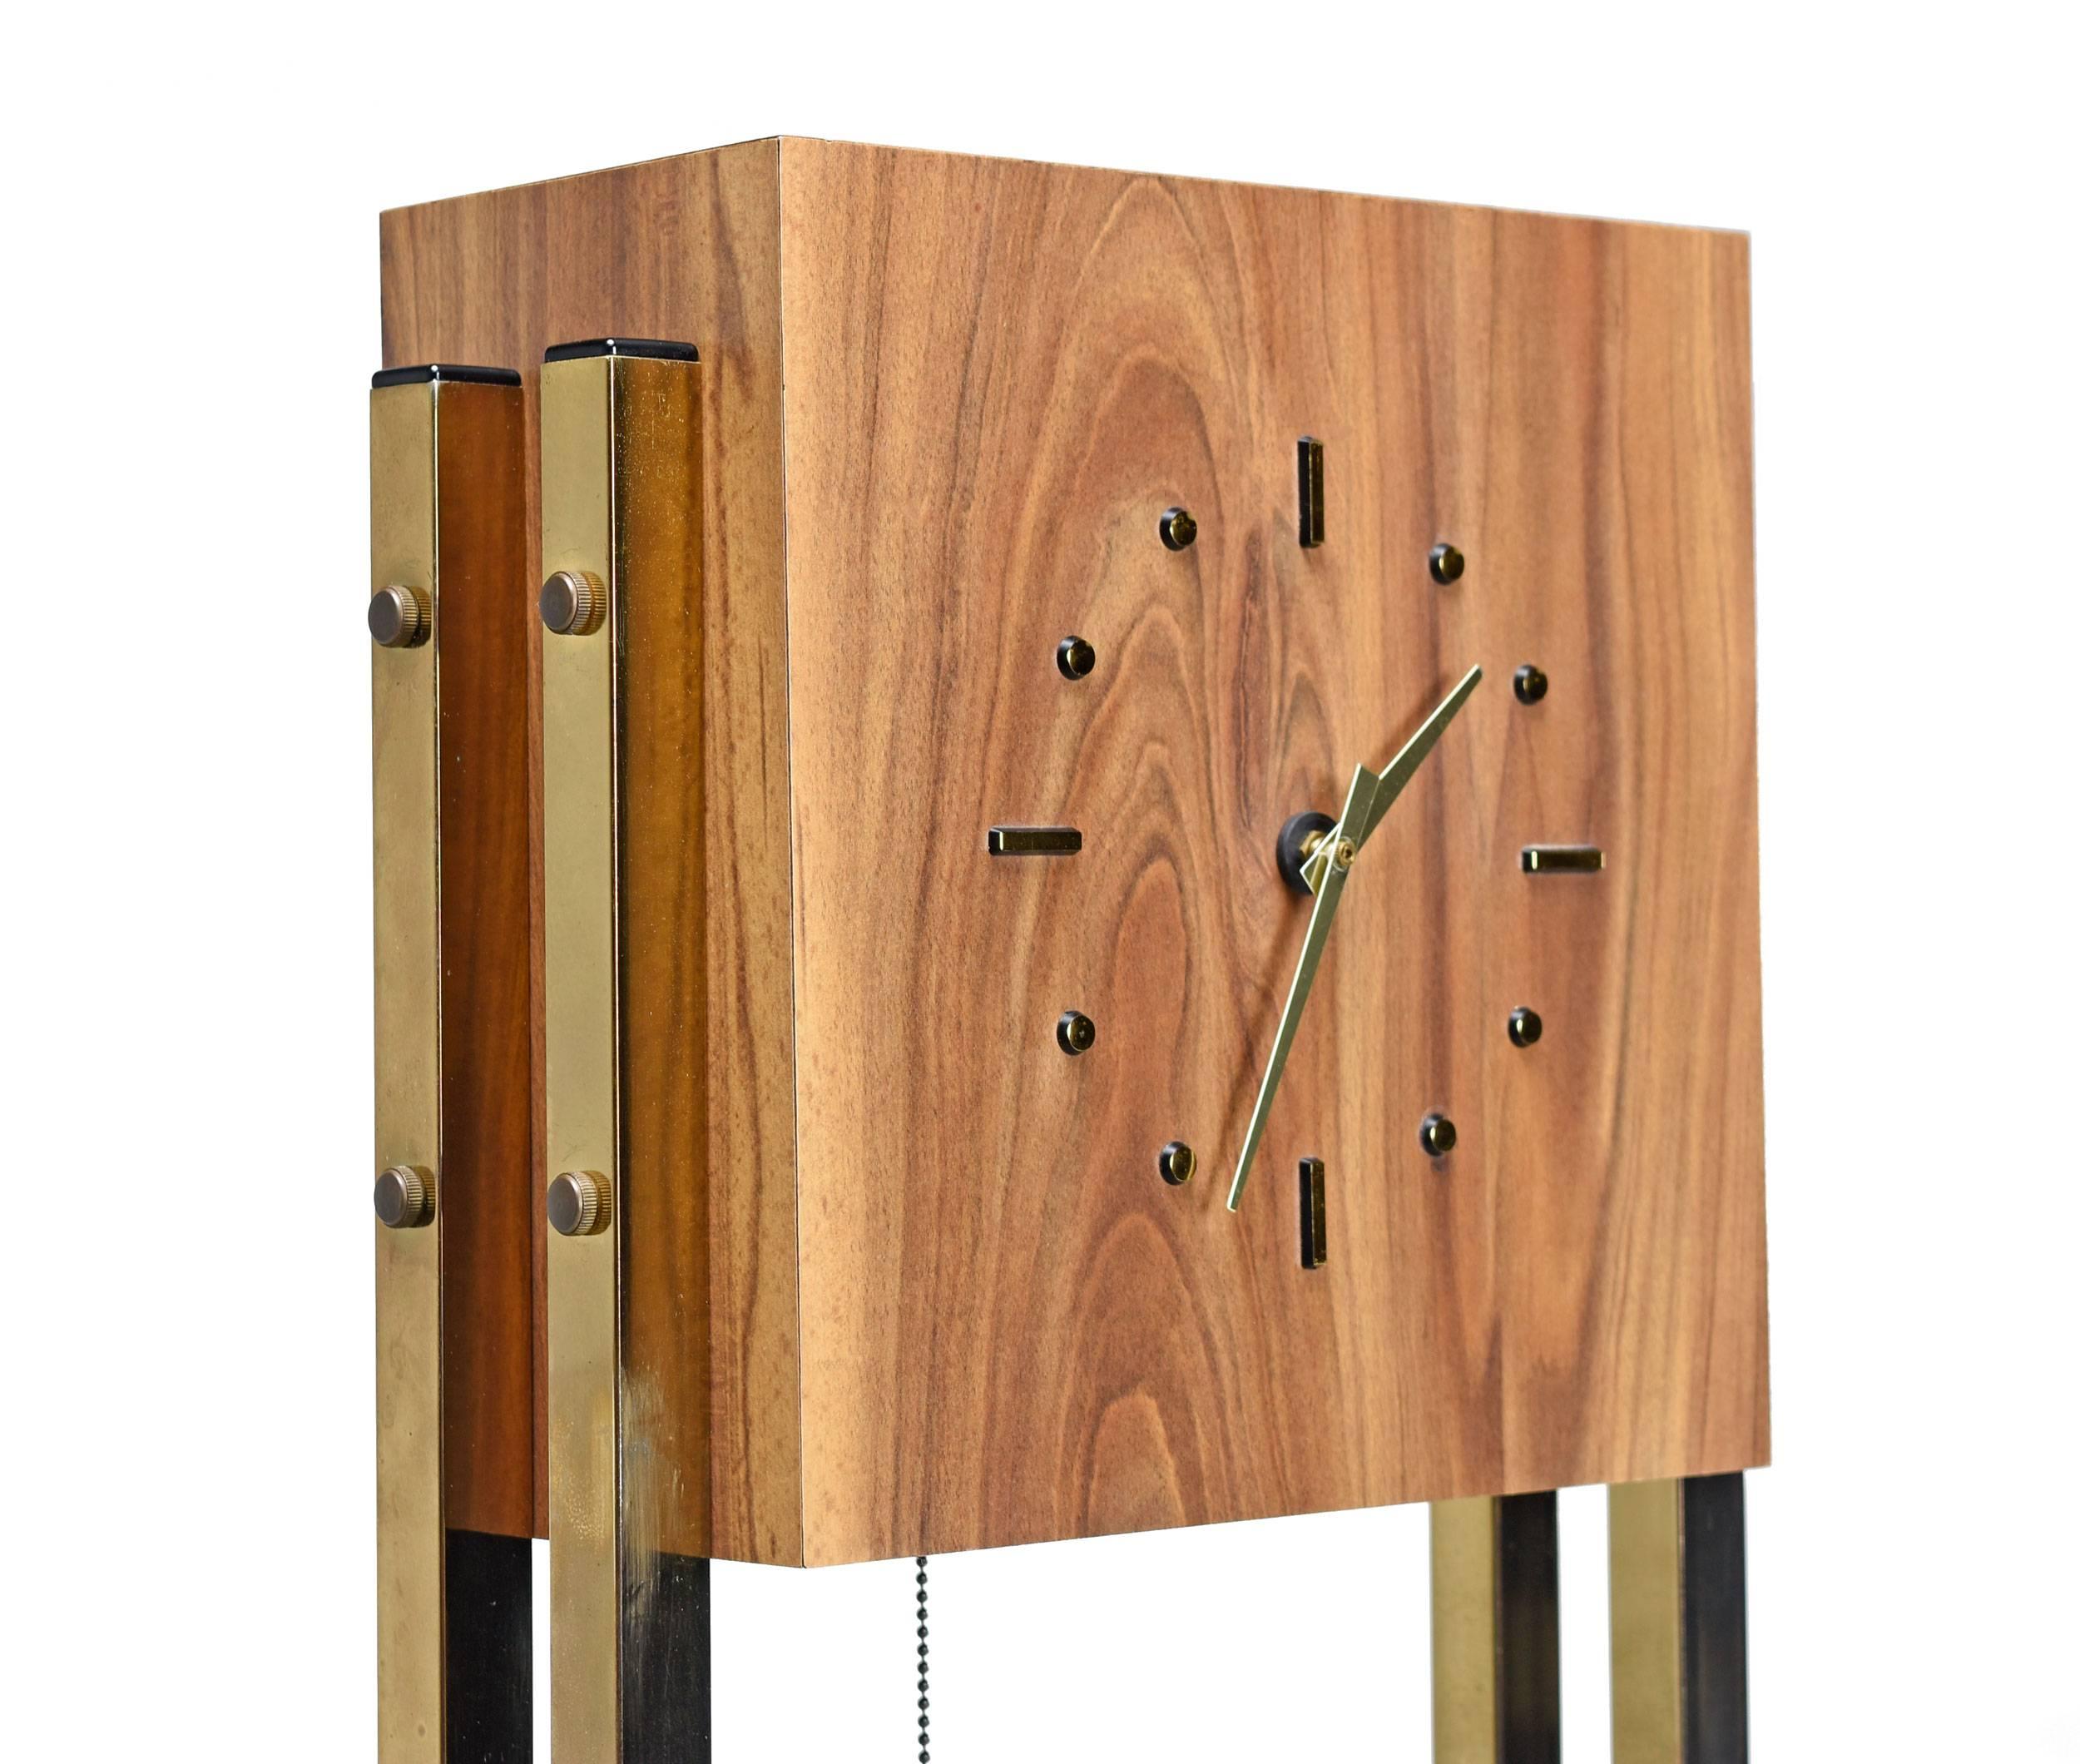 Vintage 1970s grandfather clock with Minimalist modern design. The sleek and sexy clock features brass pillars and a laminate surface that mimics the look of wood. A light emanate's from beneath the clock face with a convenient chain switch. The